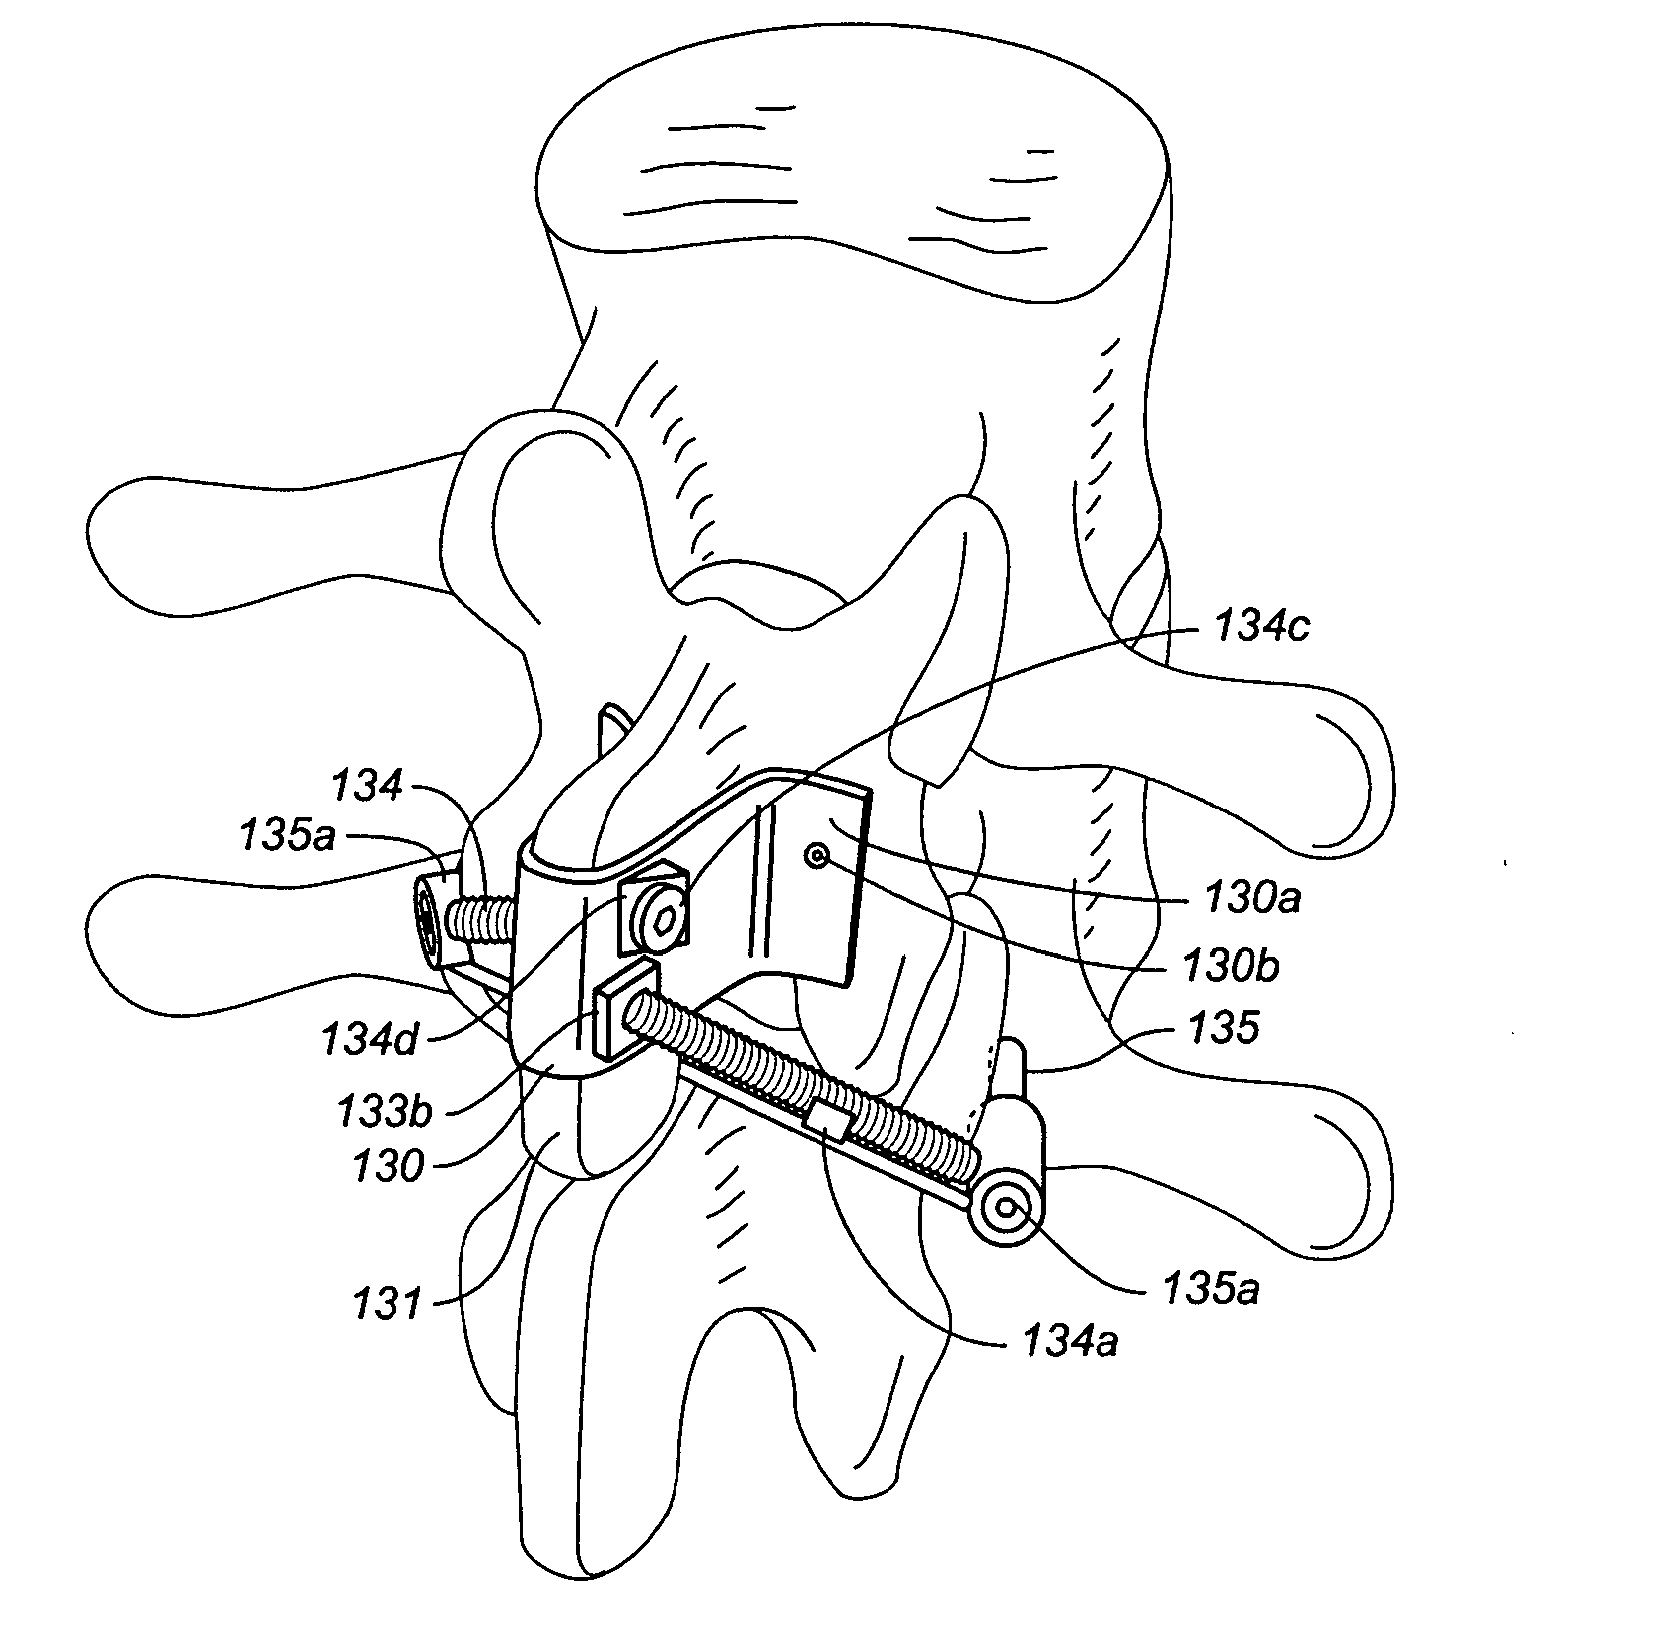 Adjustable spinal implant device and method